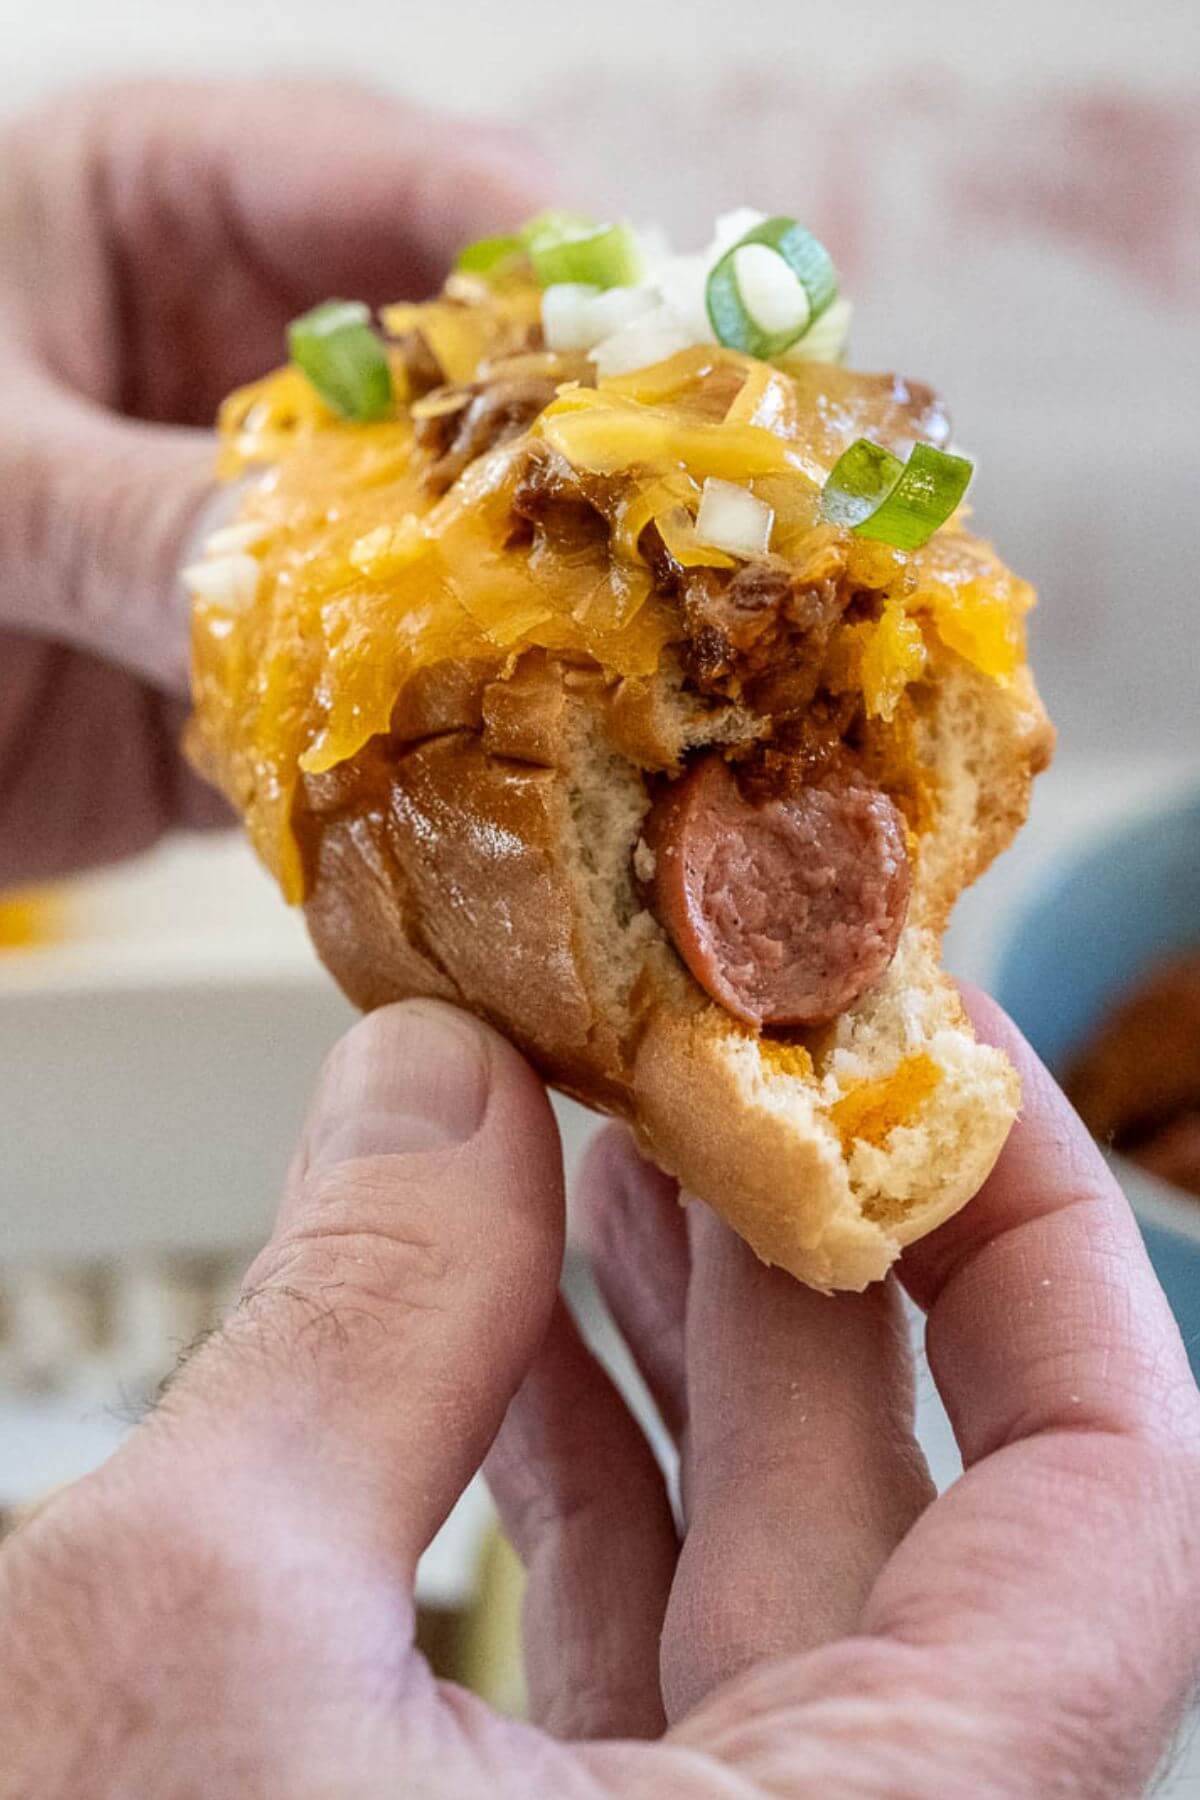 A half eaten chili dog is held between two hands showing all the layers of toppings.